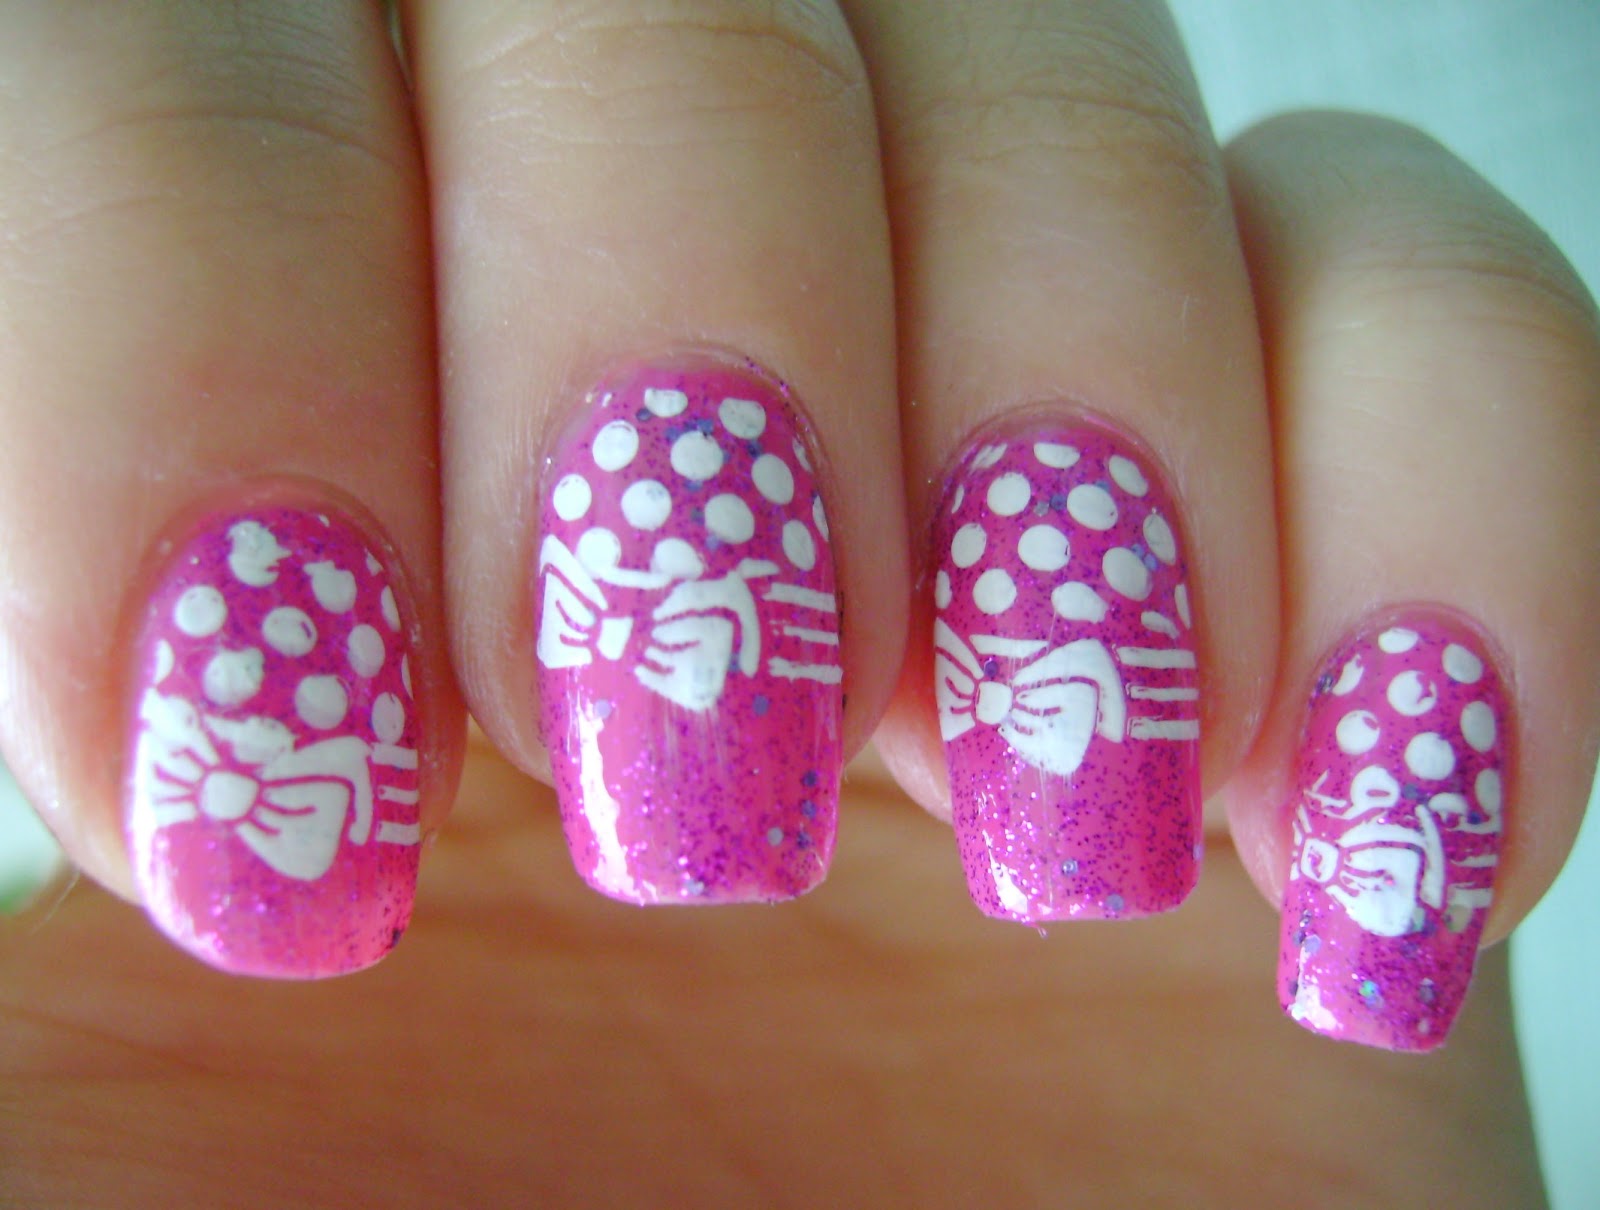 10. Polka Dot Acrylic Nails with Matte Finish - wide 3